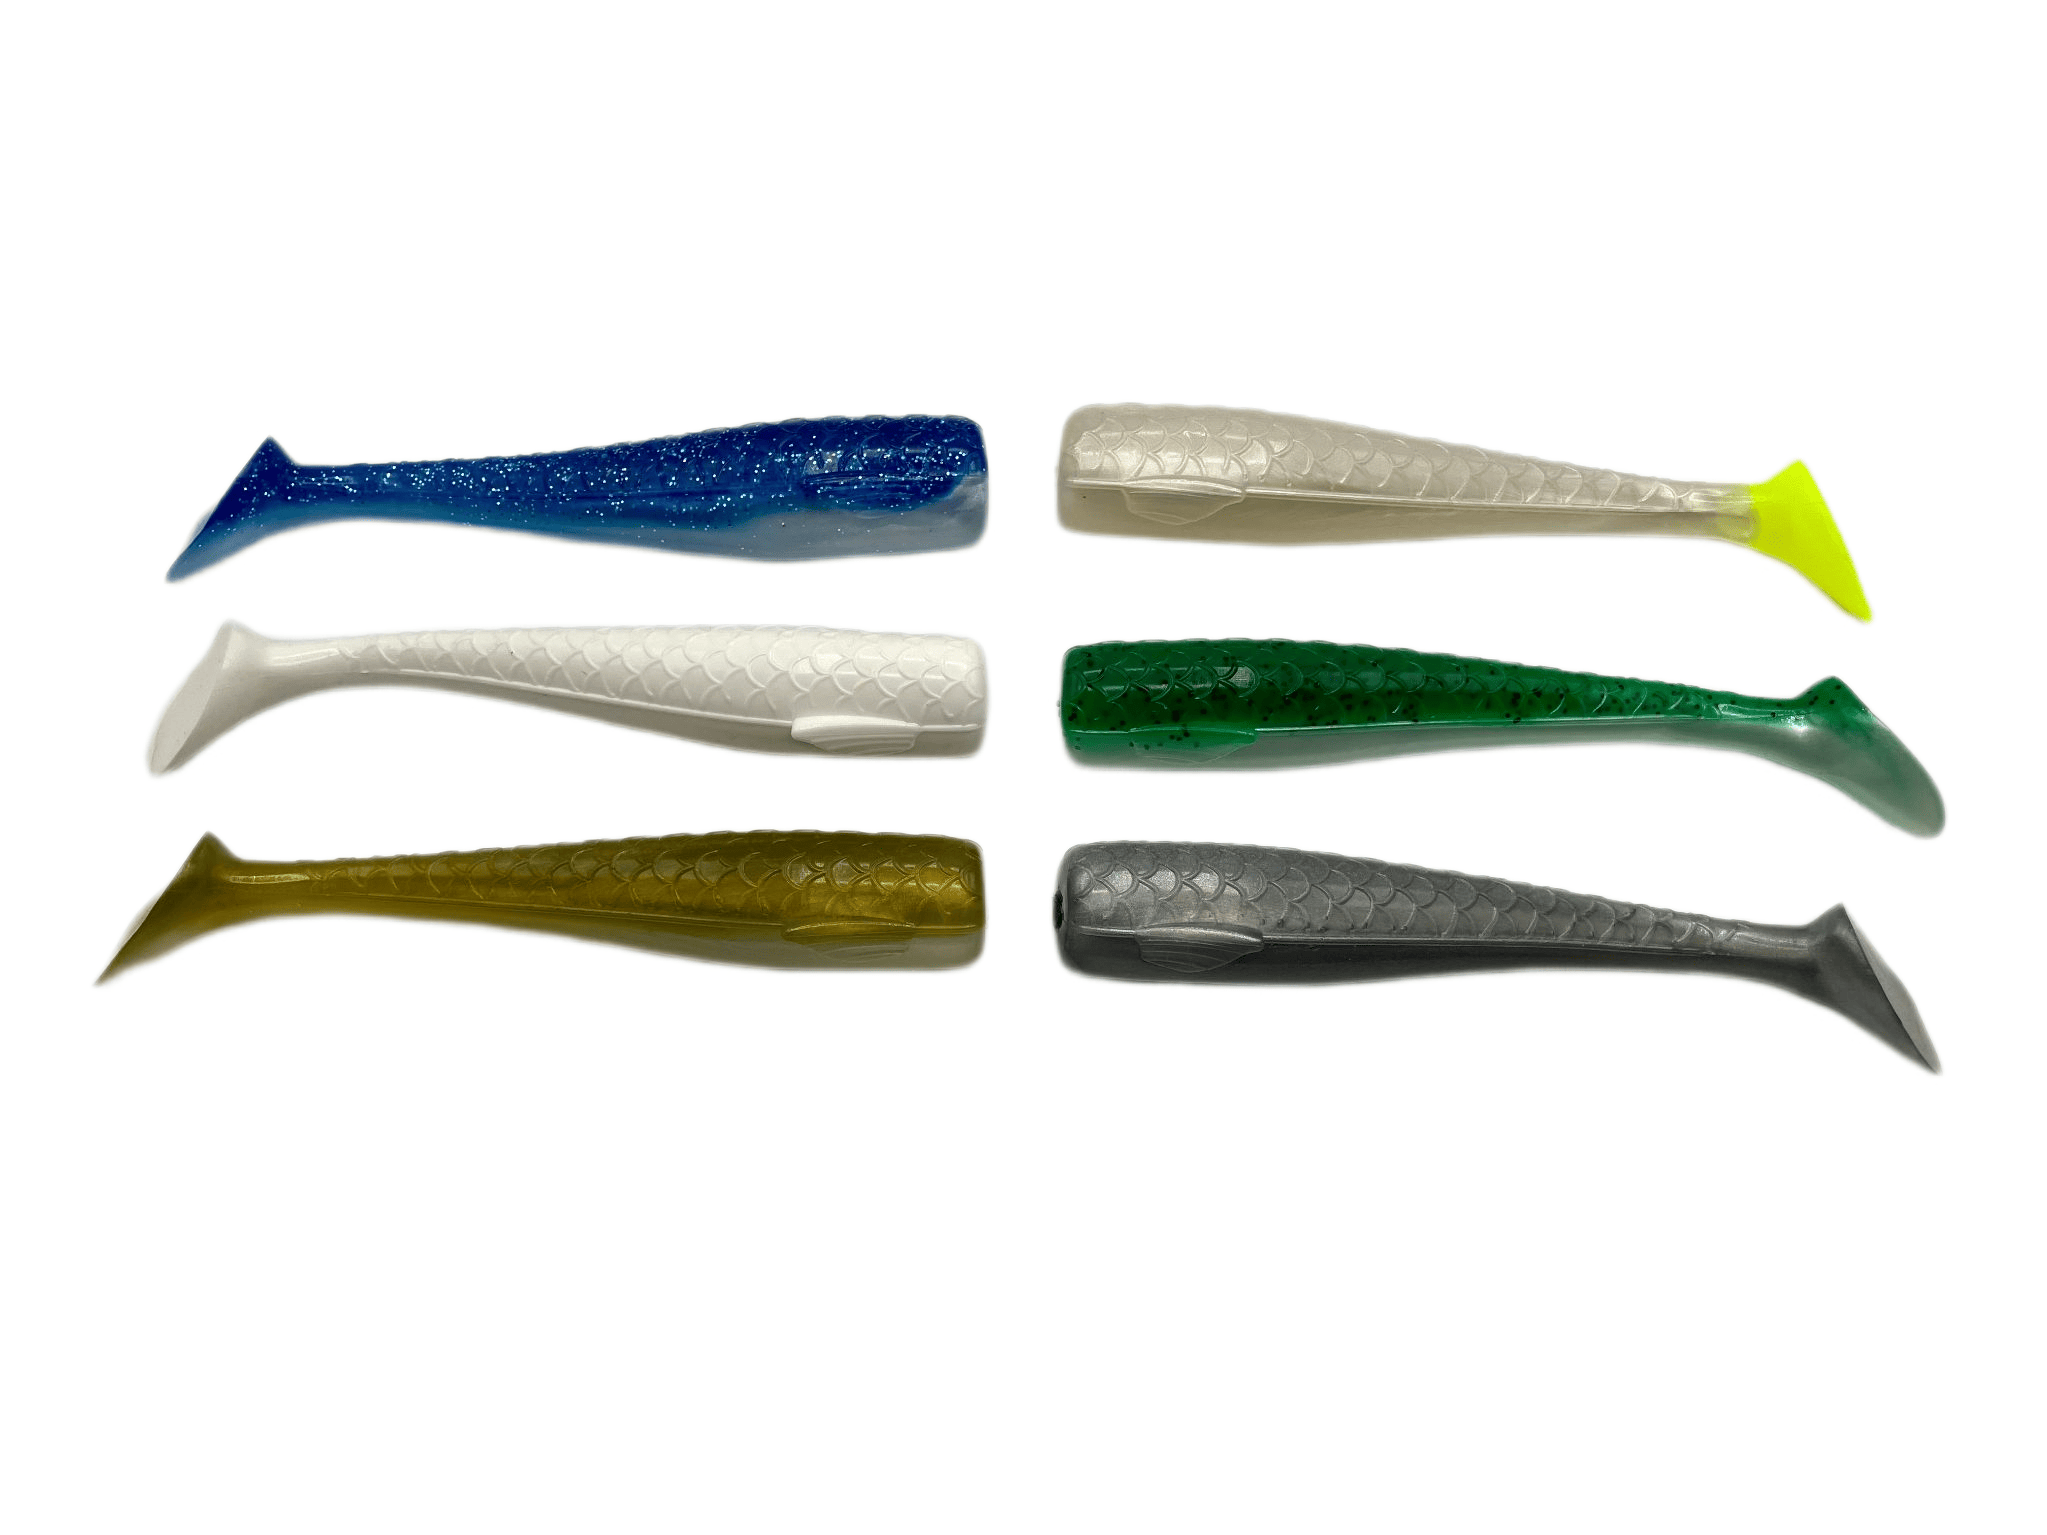 https://ronzlures.com/wp-content/uploads/2022/06/zfin-tails-11.png